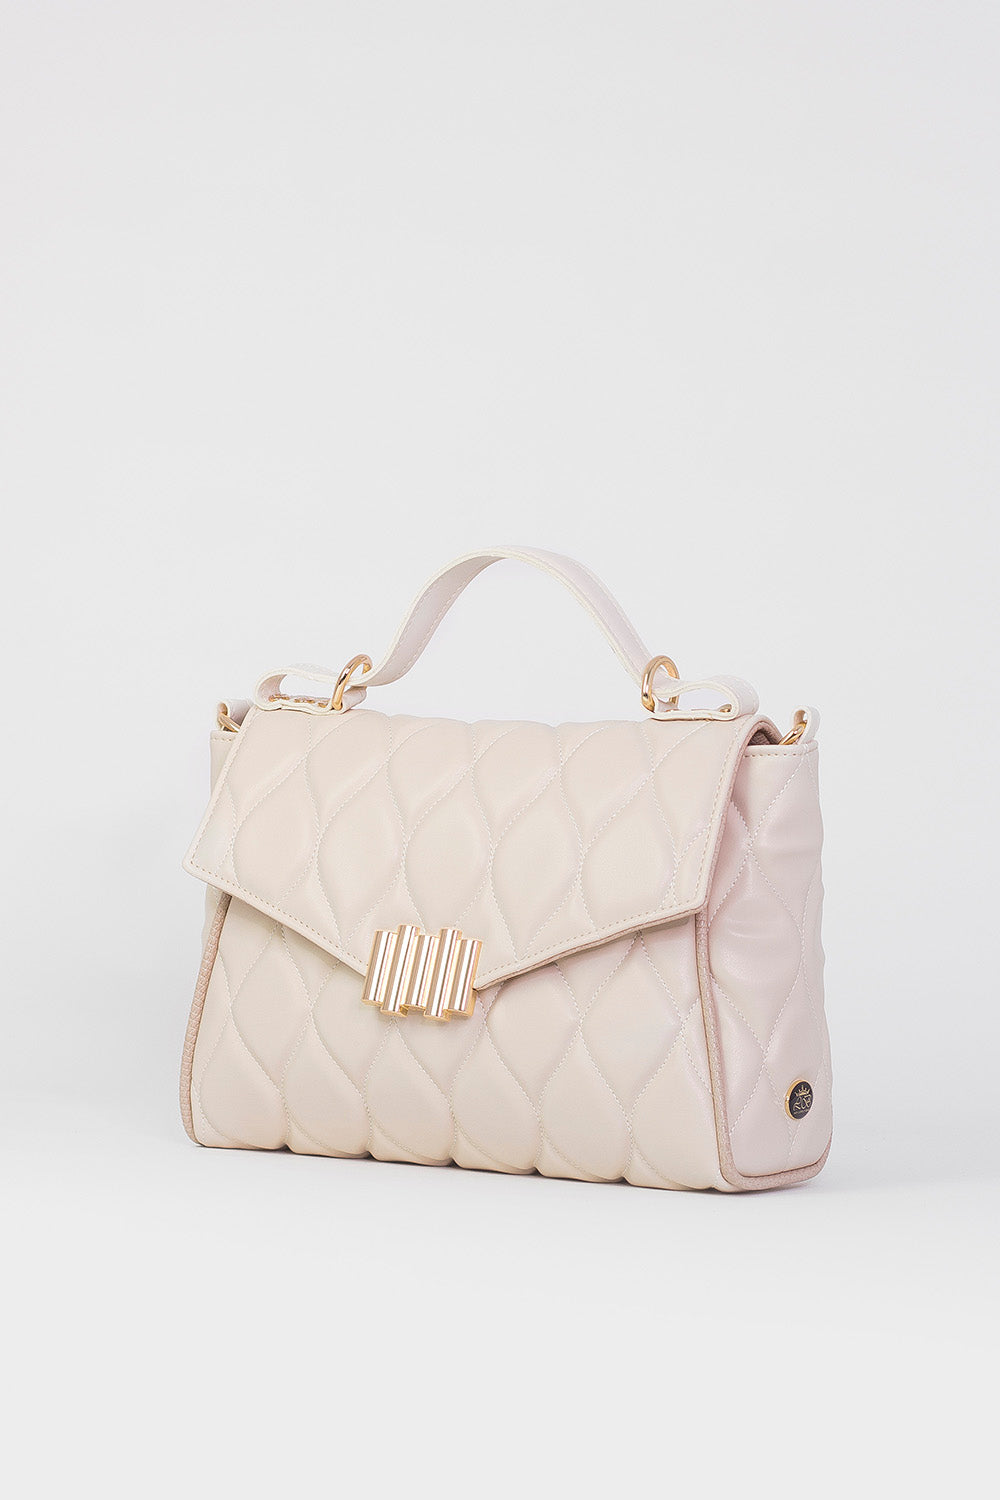 Tote bags for women - BAG - CITY - BEIGE GOLD